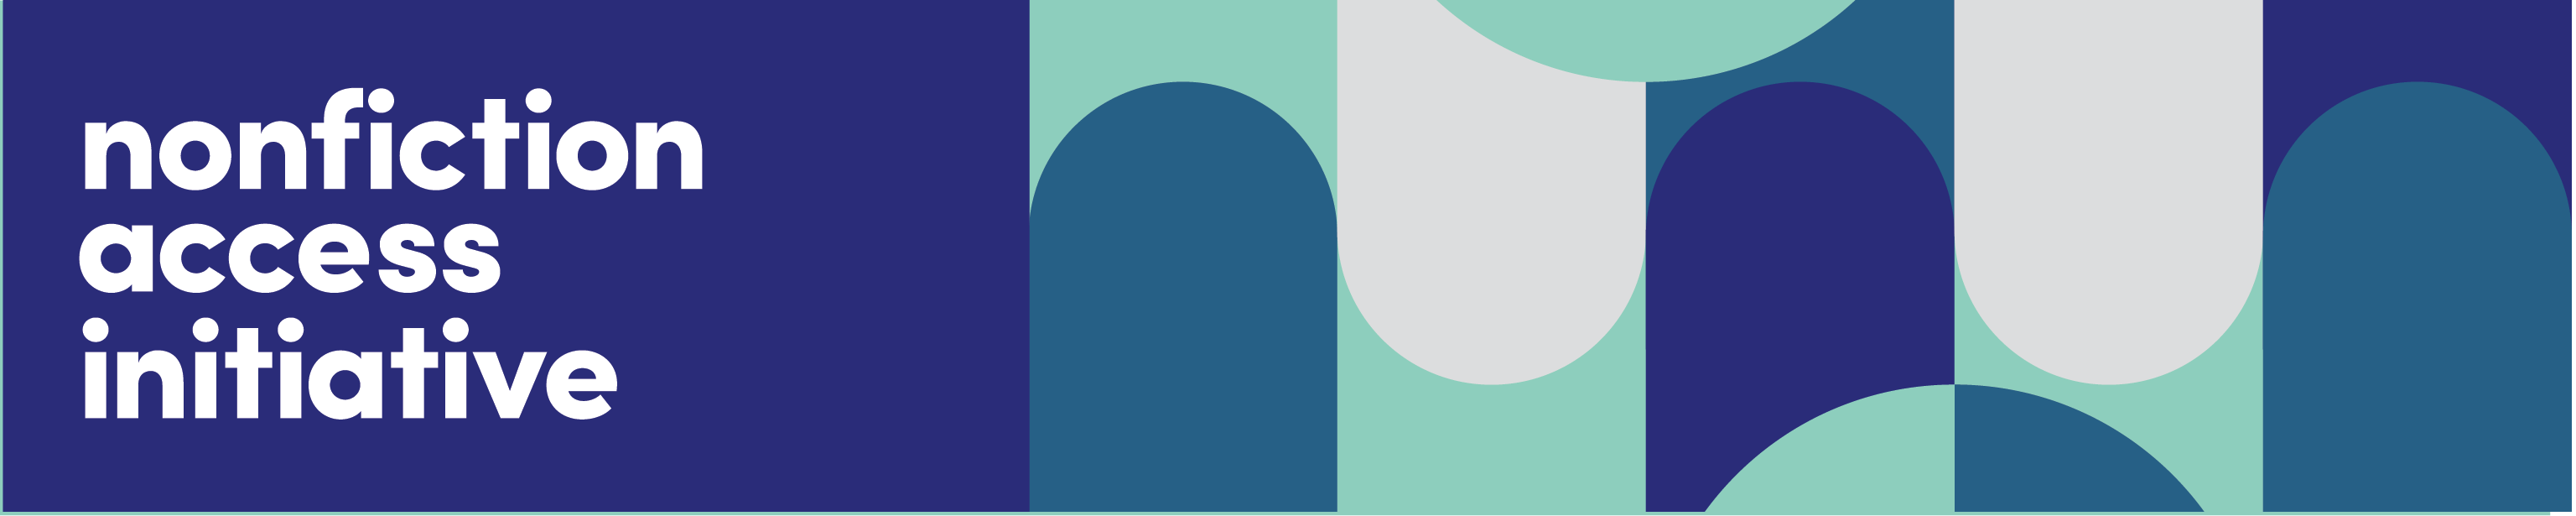 White text on blue background banner reading Nonfiction Access Initiative on the left hand side of the banner and on the right side: curved, circular objects that are intertwined with each other in dark blue, light green, and grey colors.